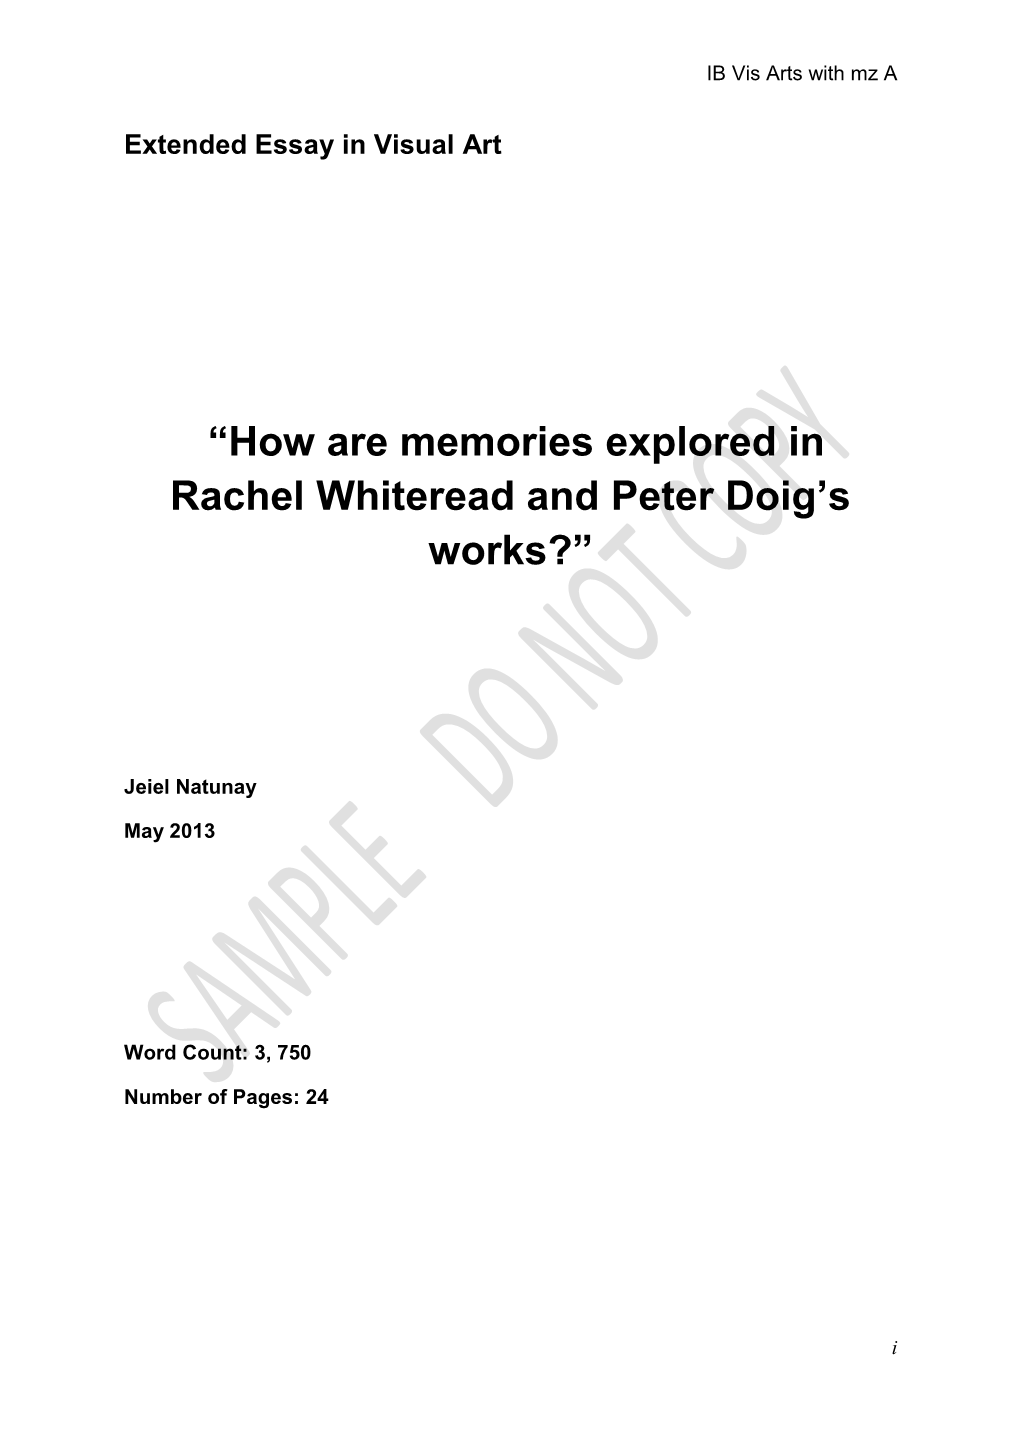 “How Are Memories Explored in Rachel Whiteread and Peter Doig's